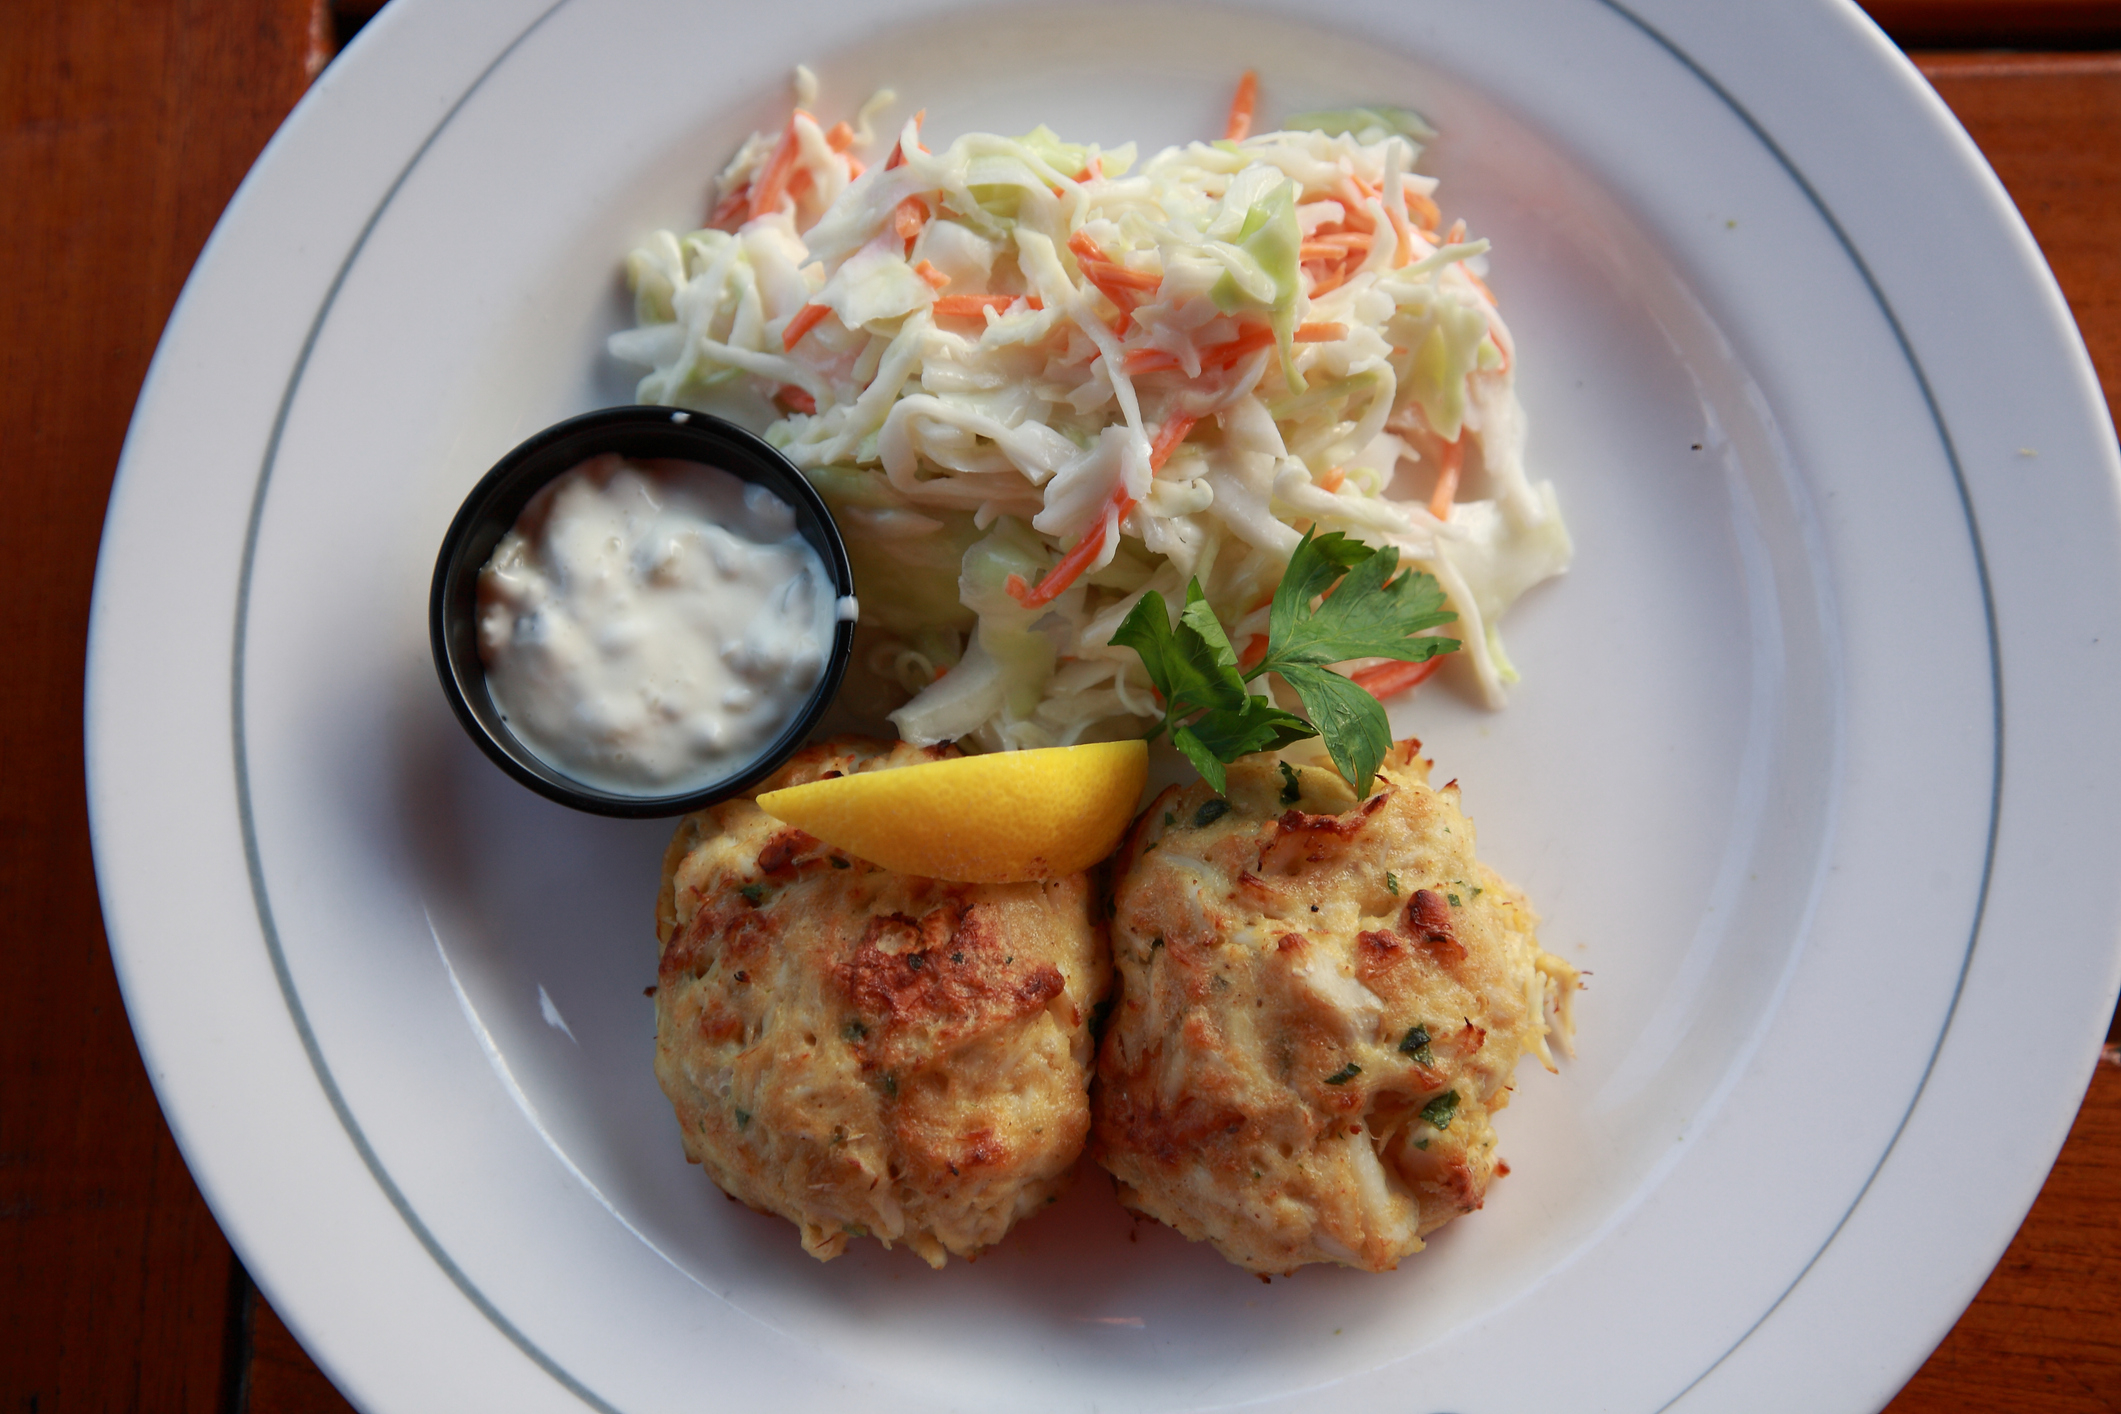 Plate with two crab cakes, a lemon wedge, coleslaw, and a side of sauce